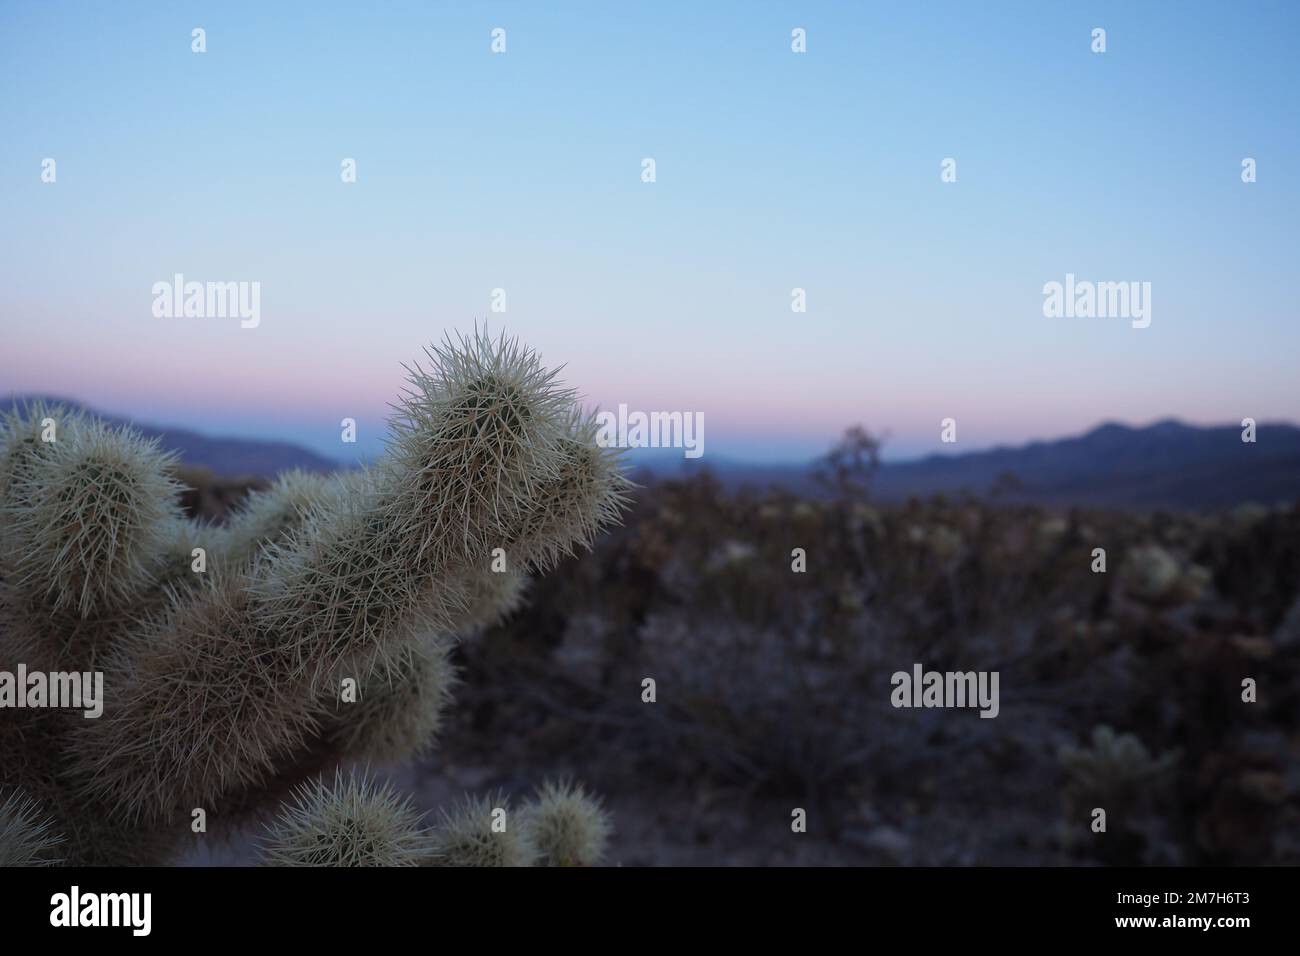 A cholla cactus in the foreground during blue hour at Joshua Tree National Park's Cholla Cactus Garden Stock Photo